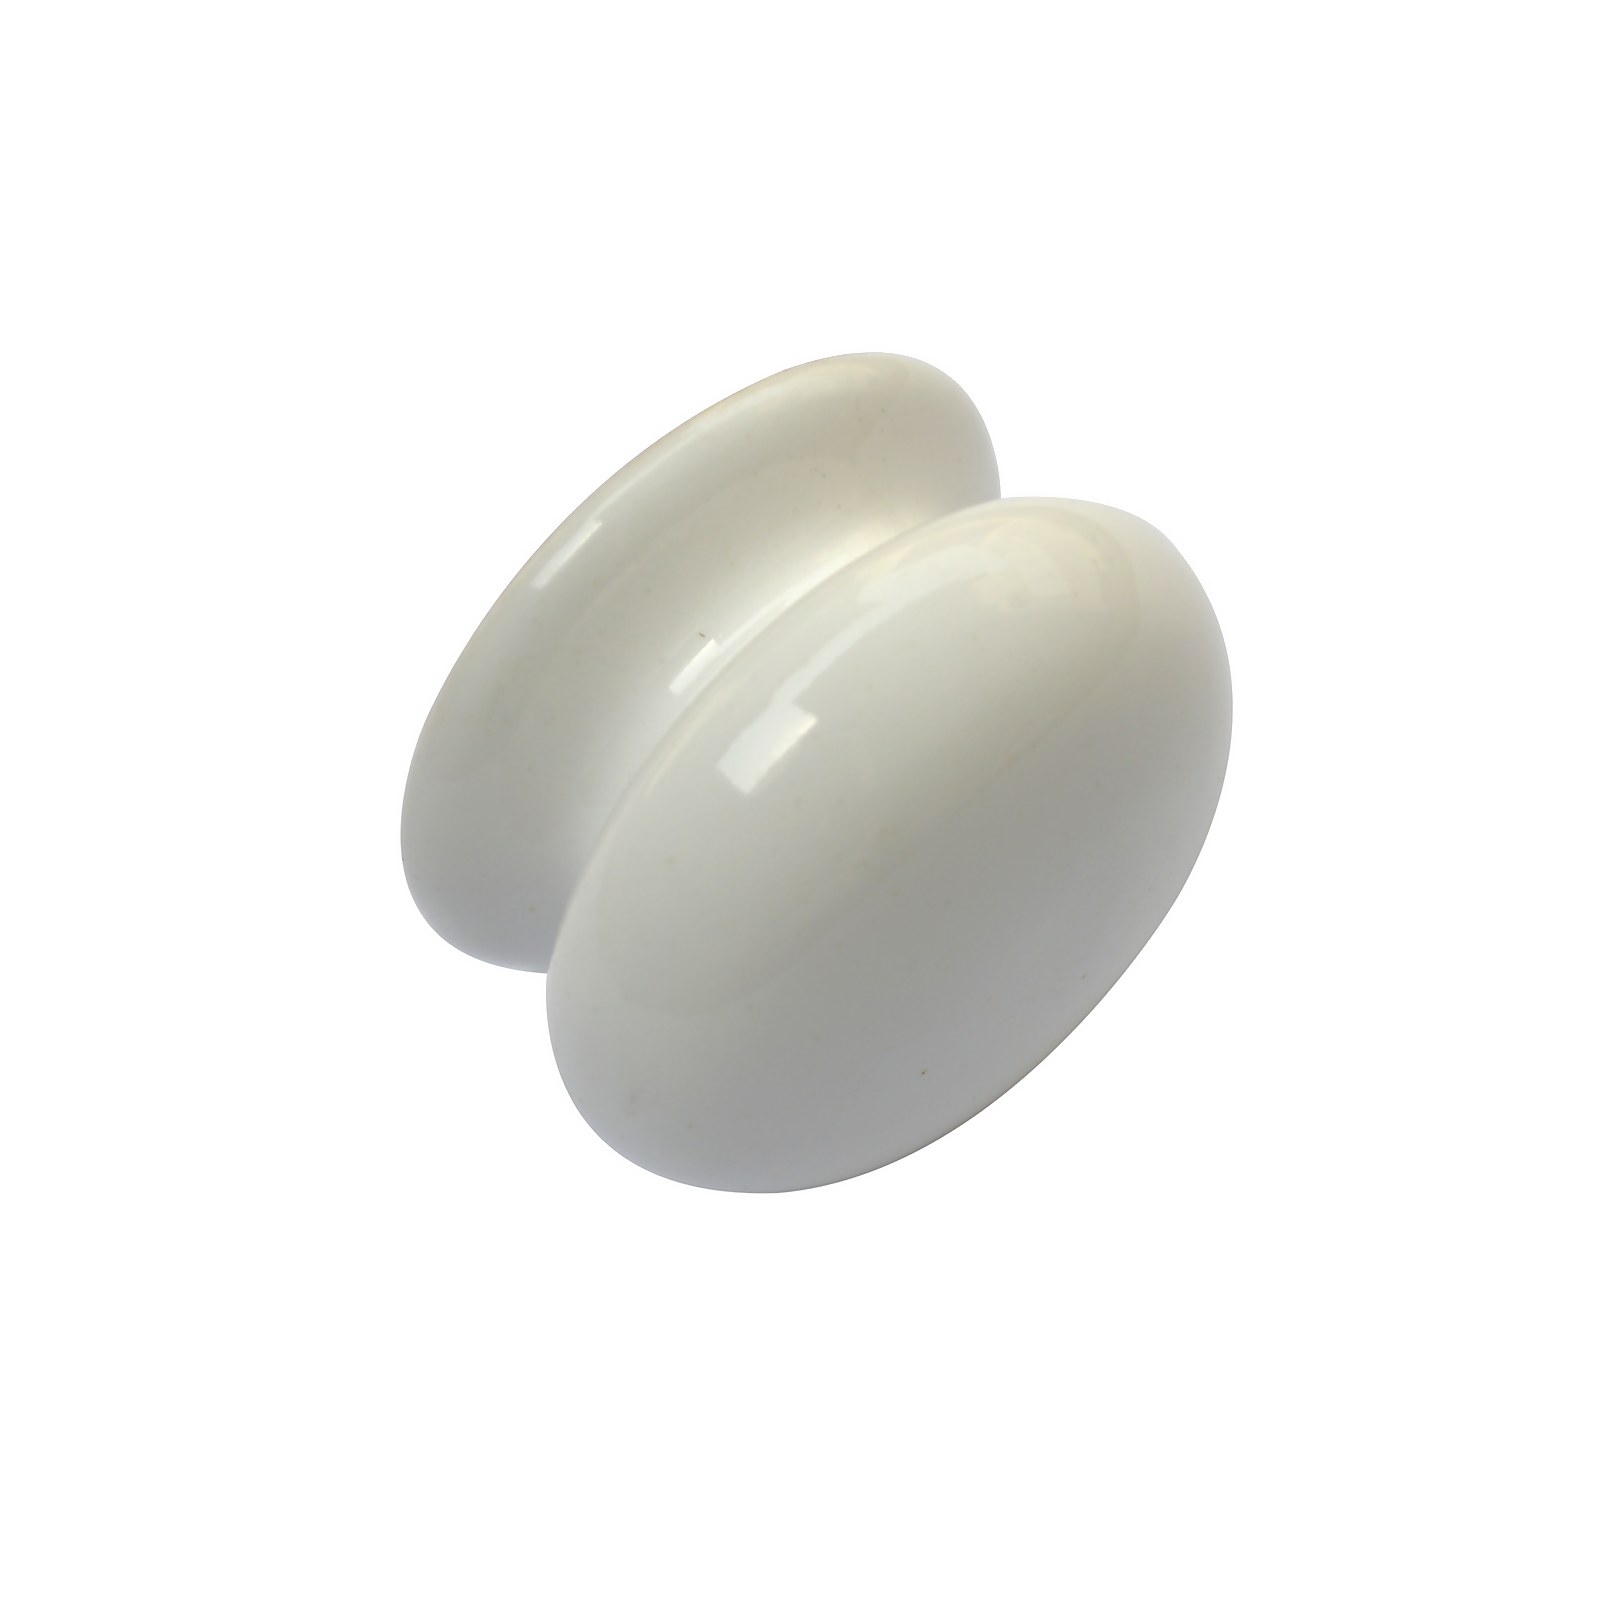 Photo of Porcelain 50mm White Cabinet Knob - 2 Pack